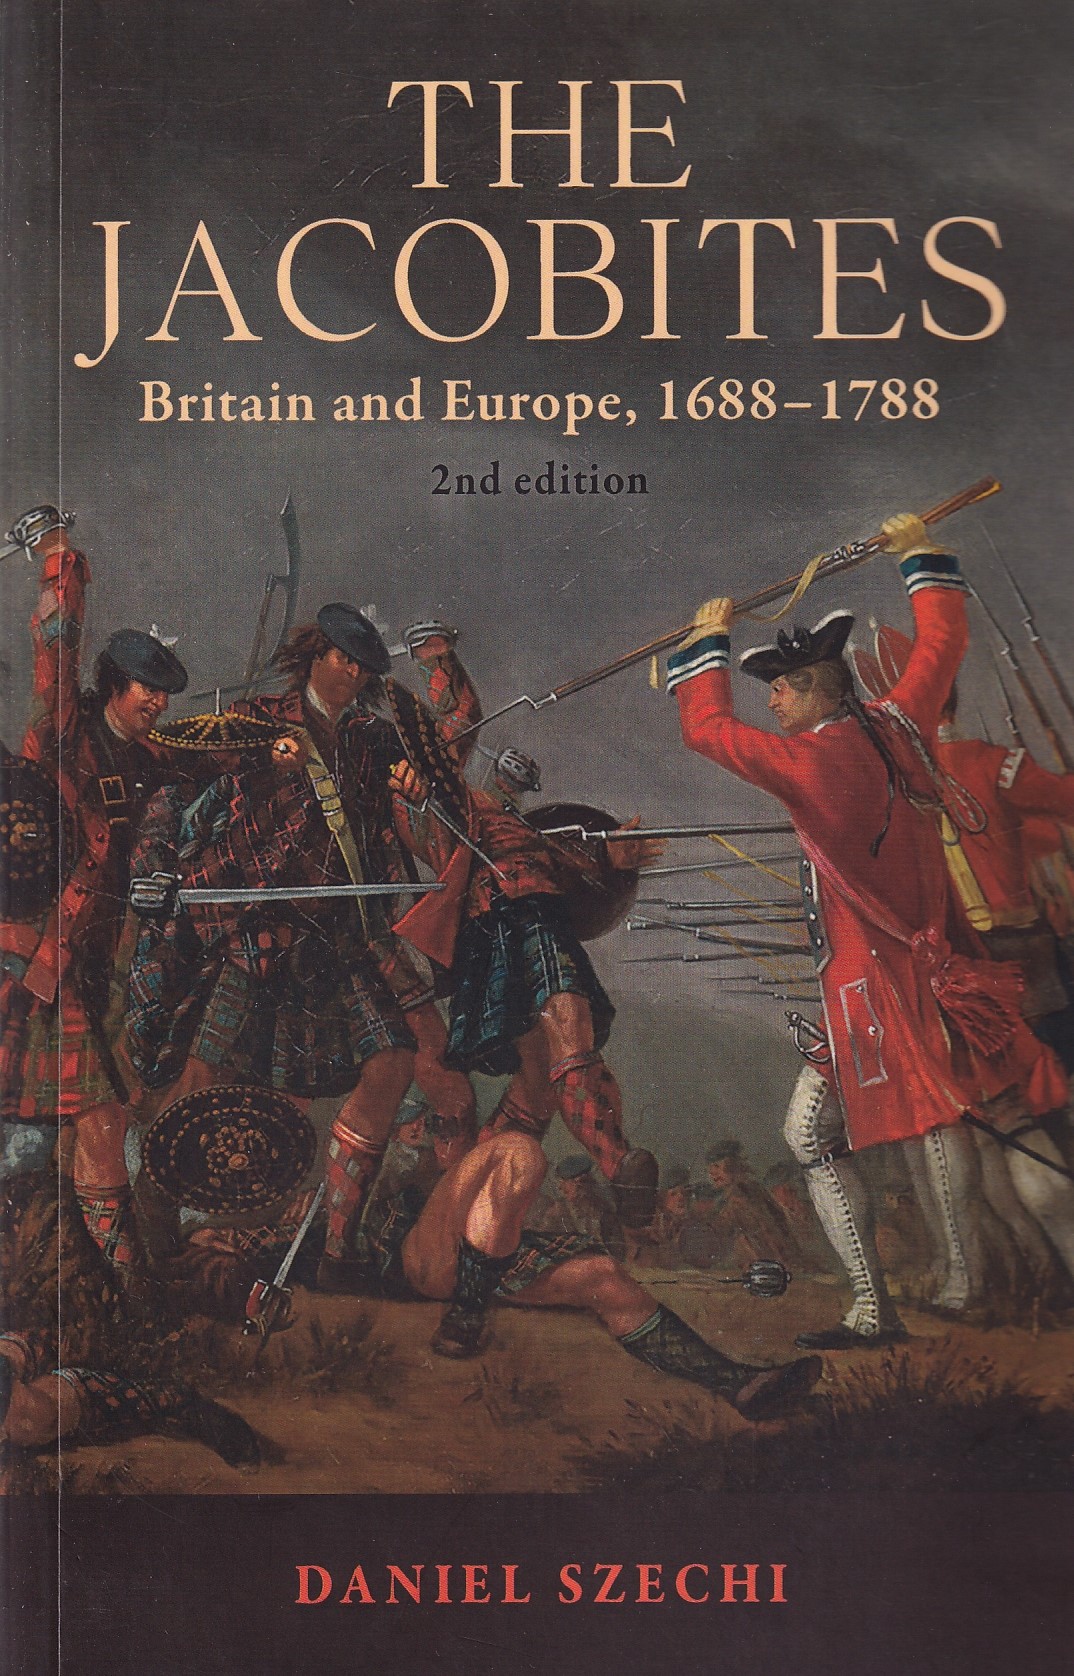 The Jacobites: Britain and Europe, 1688-1788 | Daniel Szechi | Charlie Byrne's